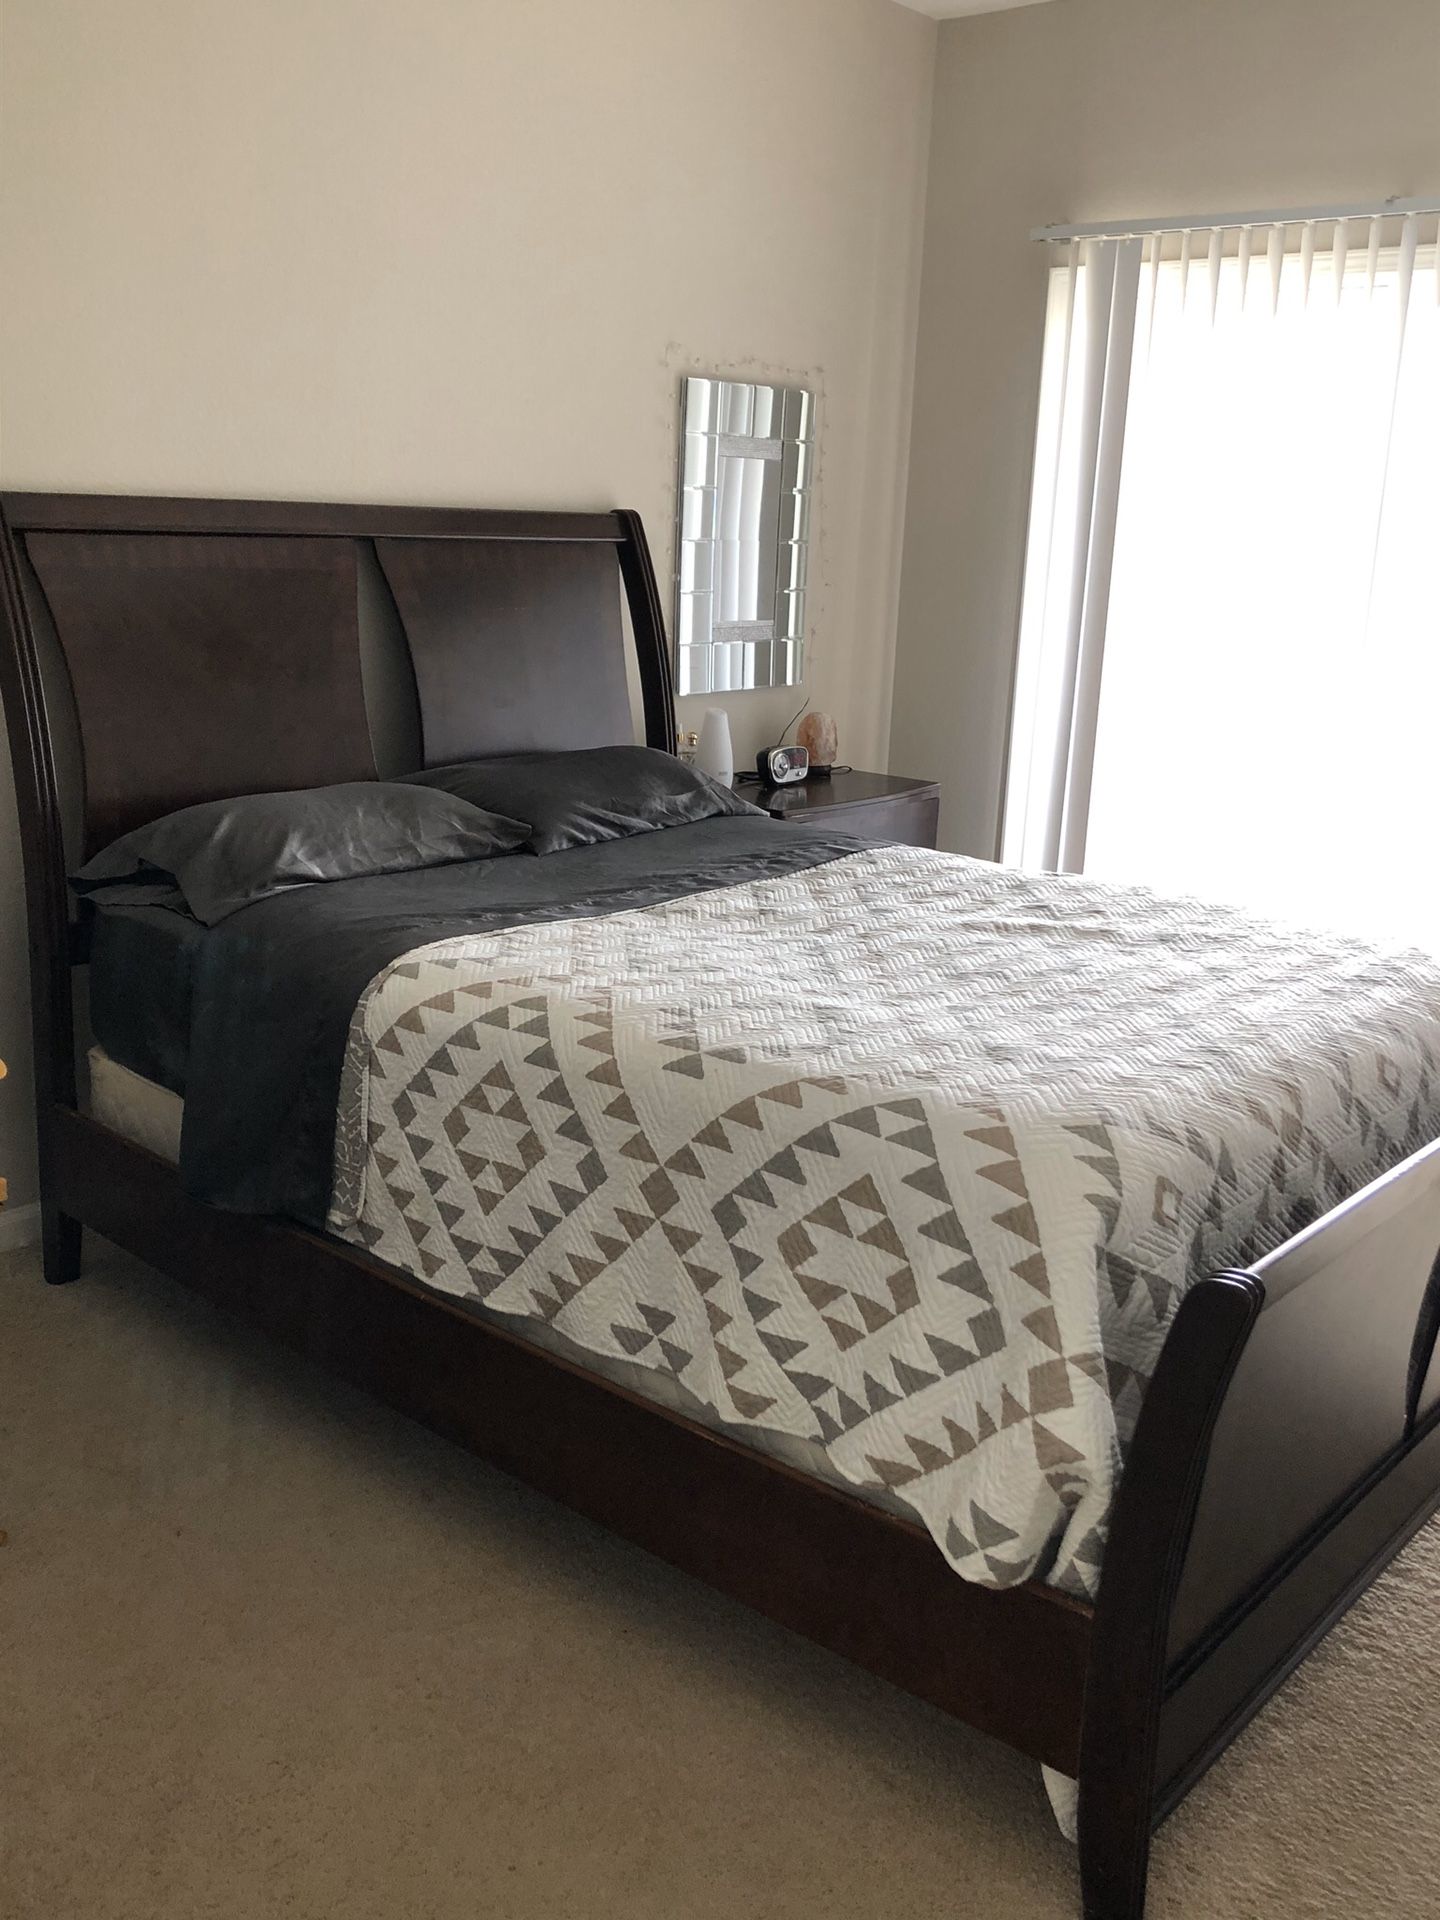 Queen Size Sleigh Bed Frame